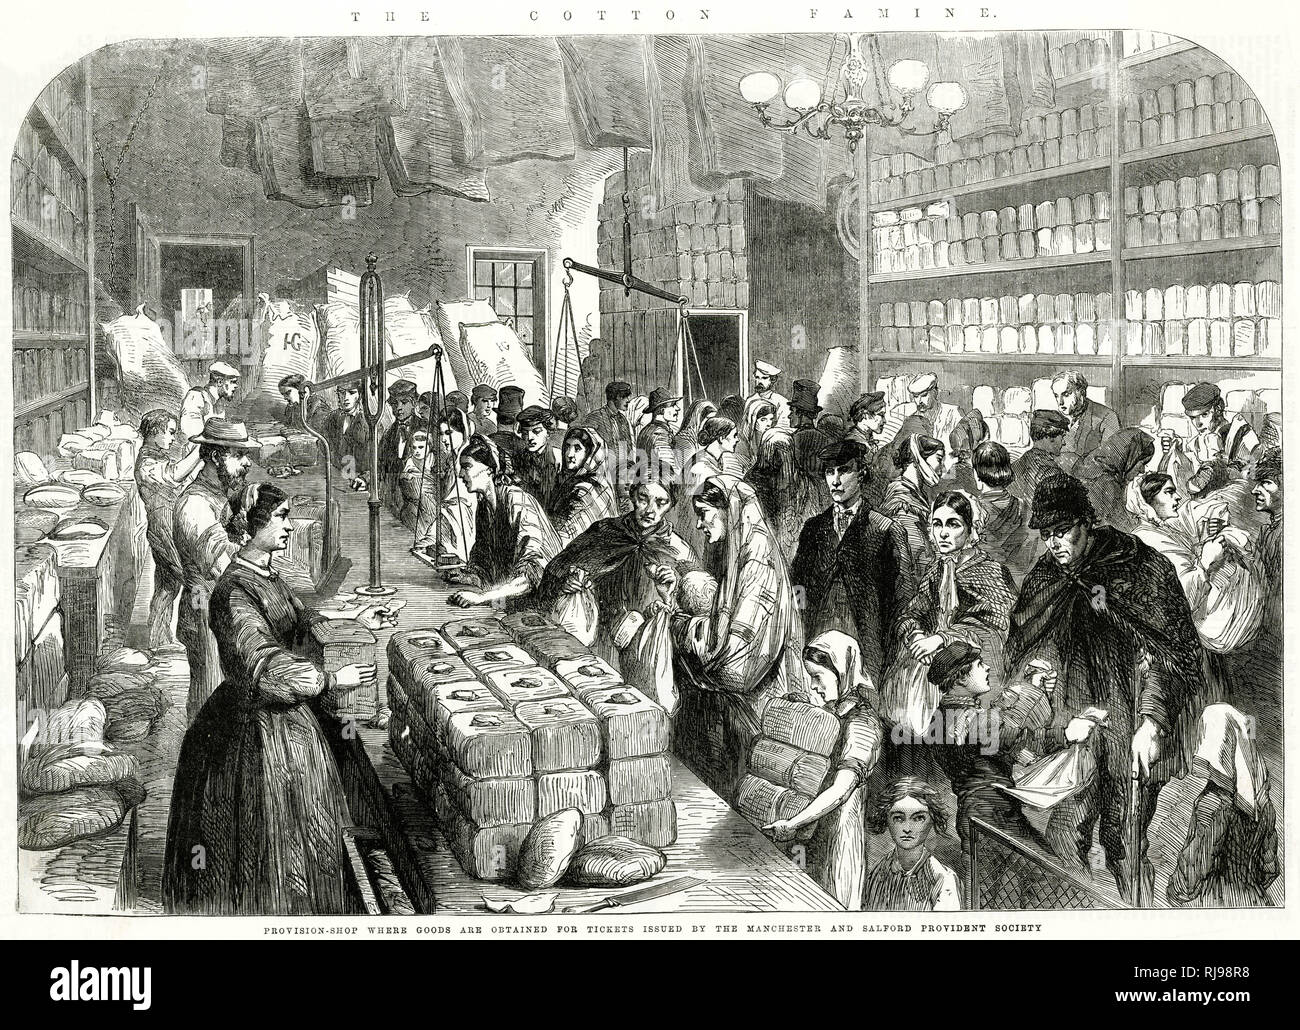 COTTON FAMINE Out of work mill-workers receive cut-price food in return for tickets issued by the Manchester and Salford Provident Society. Stock Photo